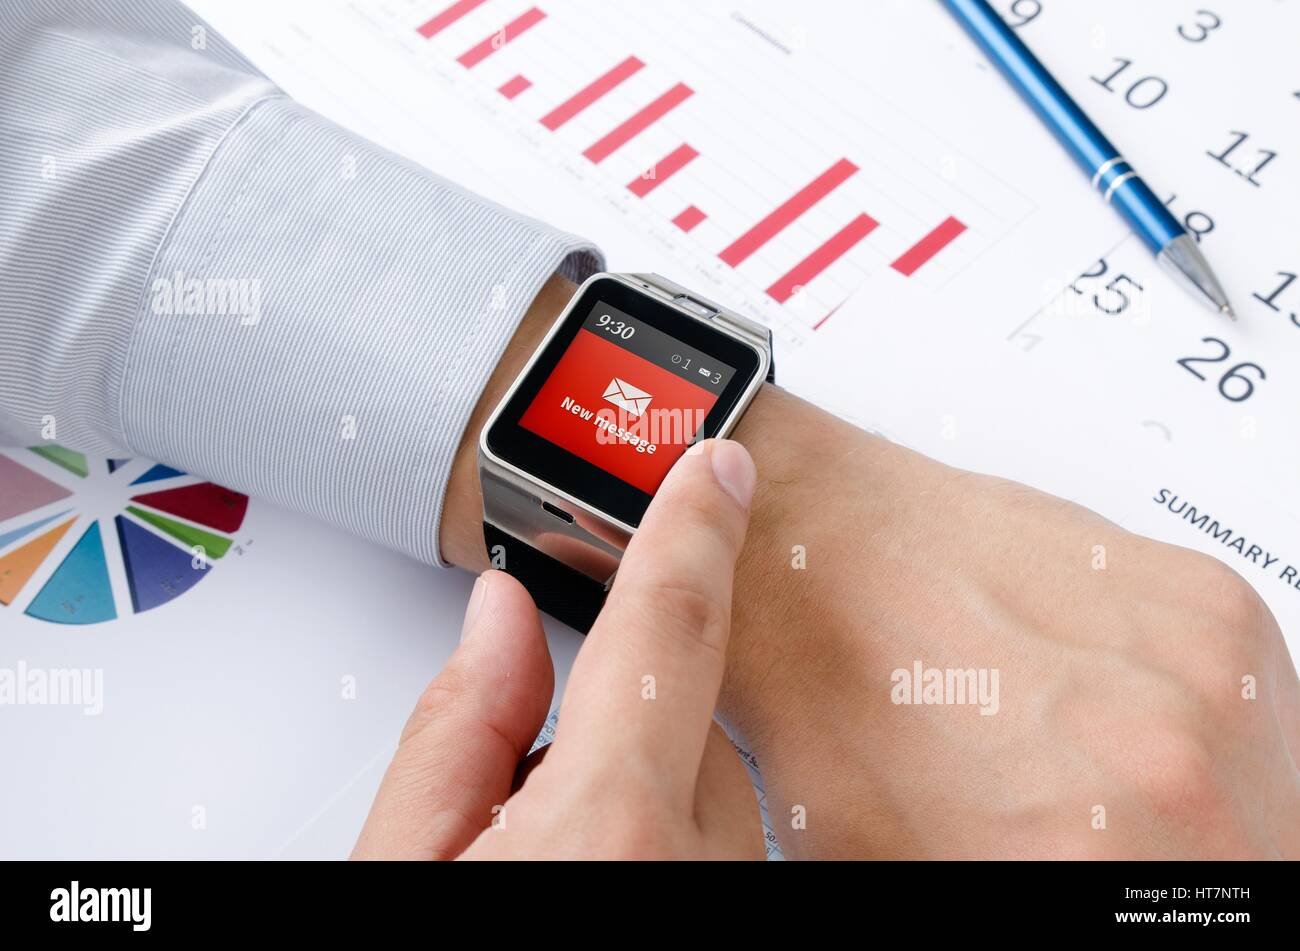 Man working with smart watch in office. New message received notification on screen Stock Photo